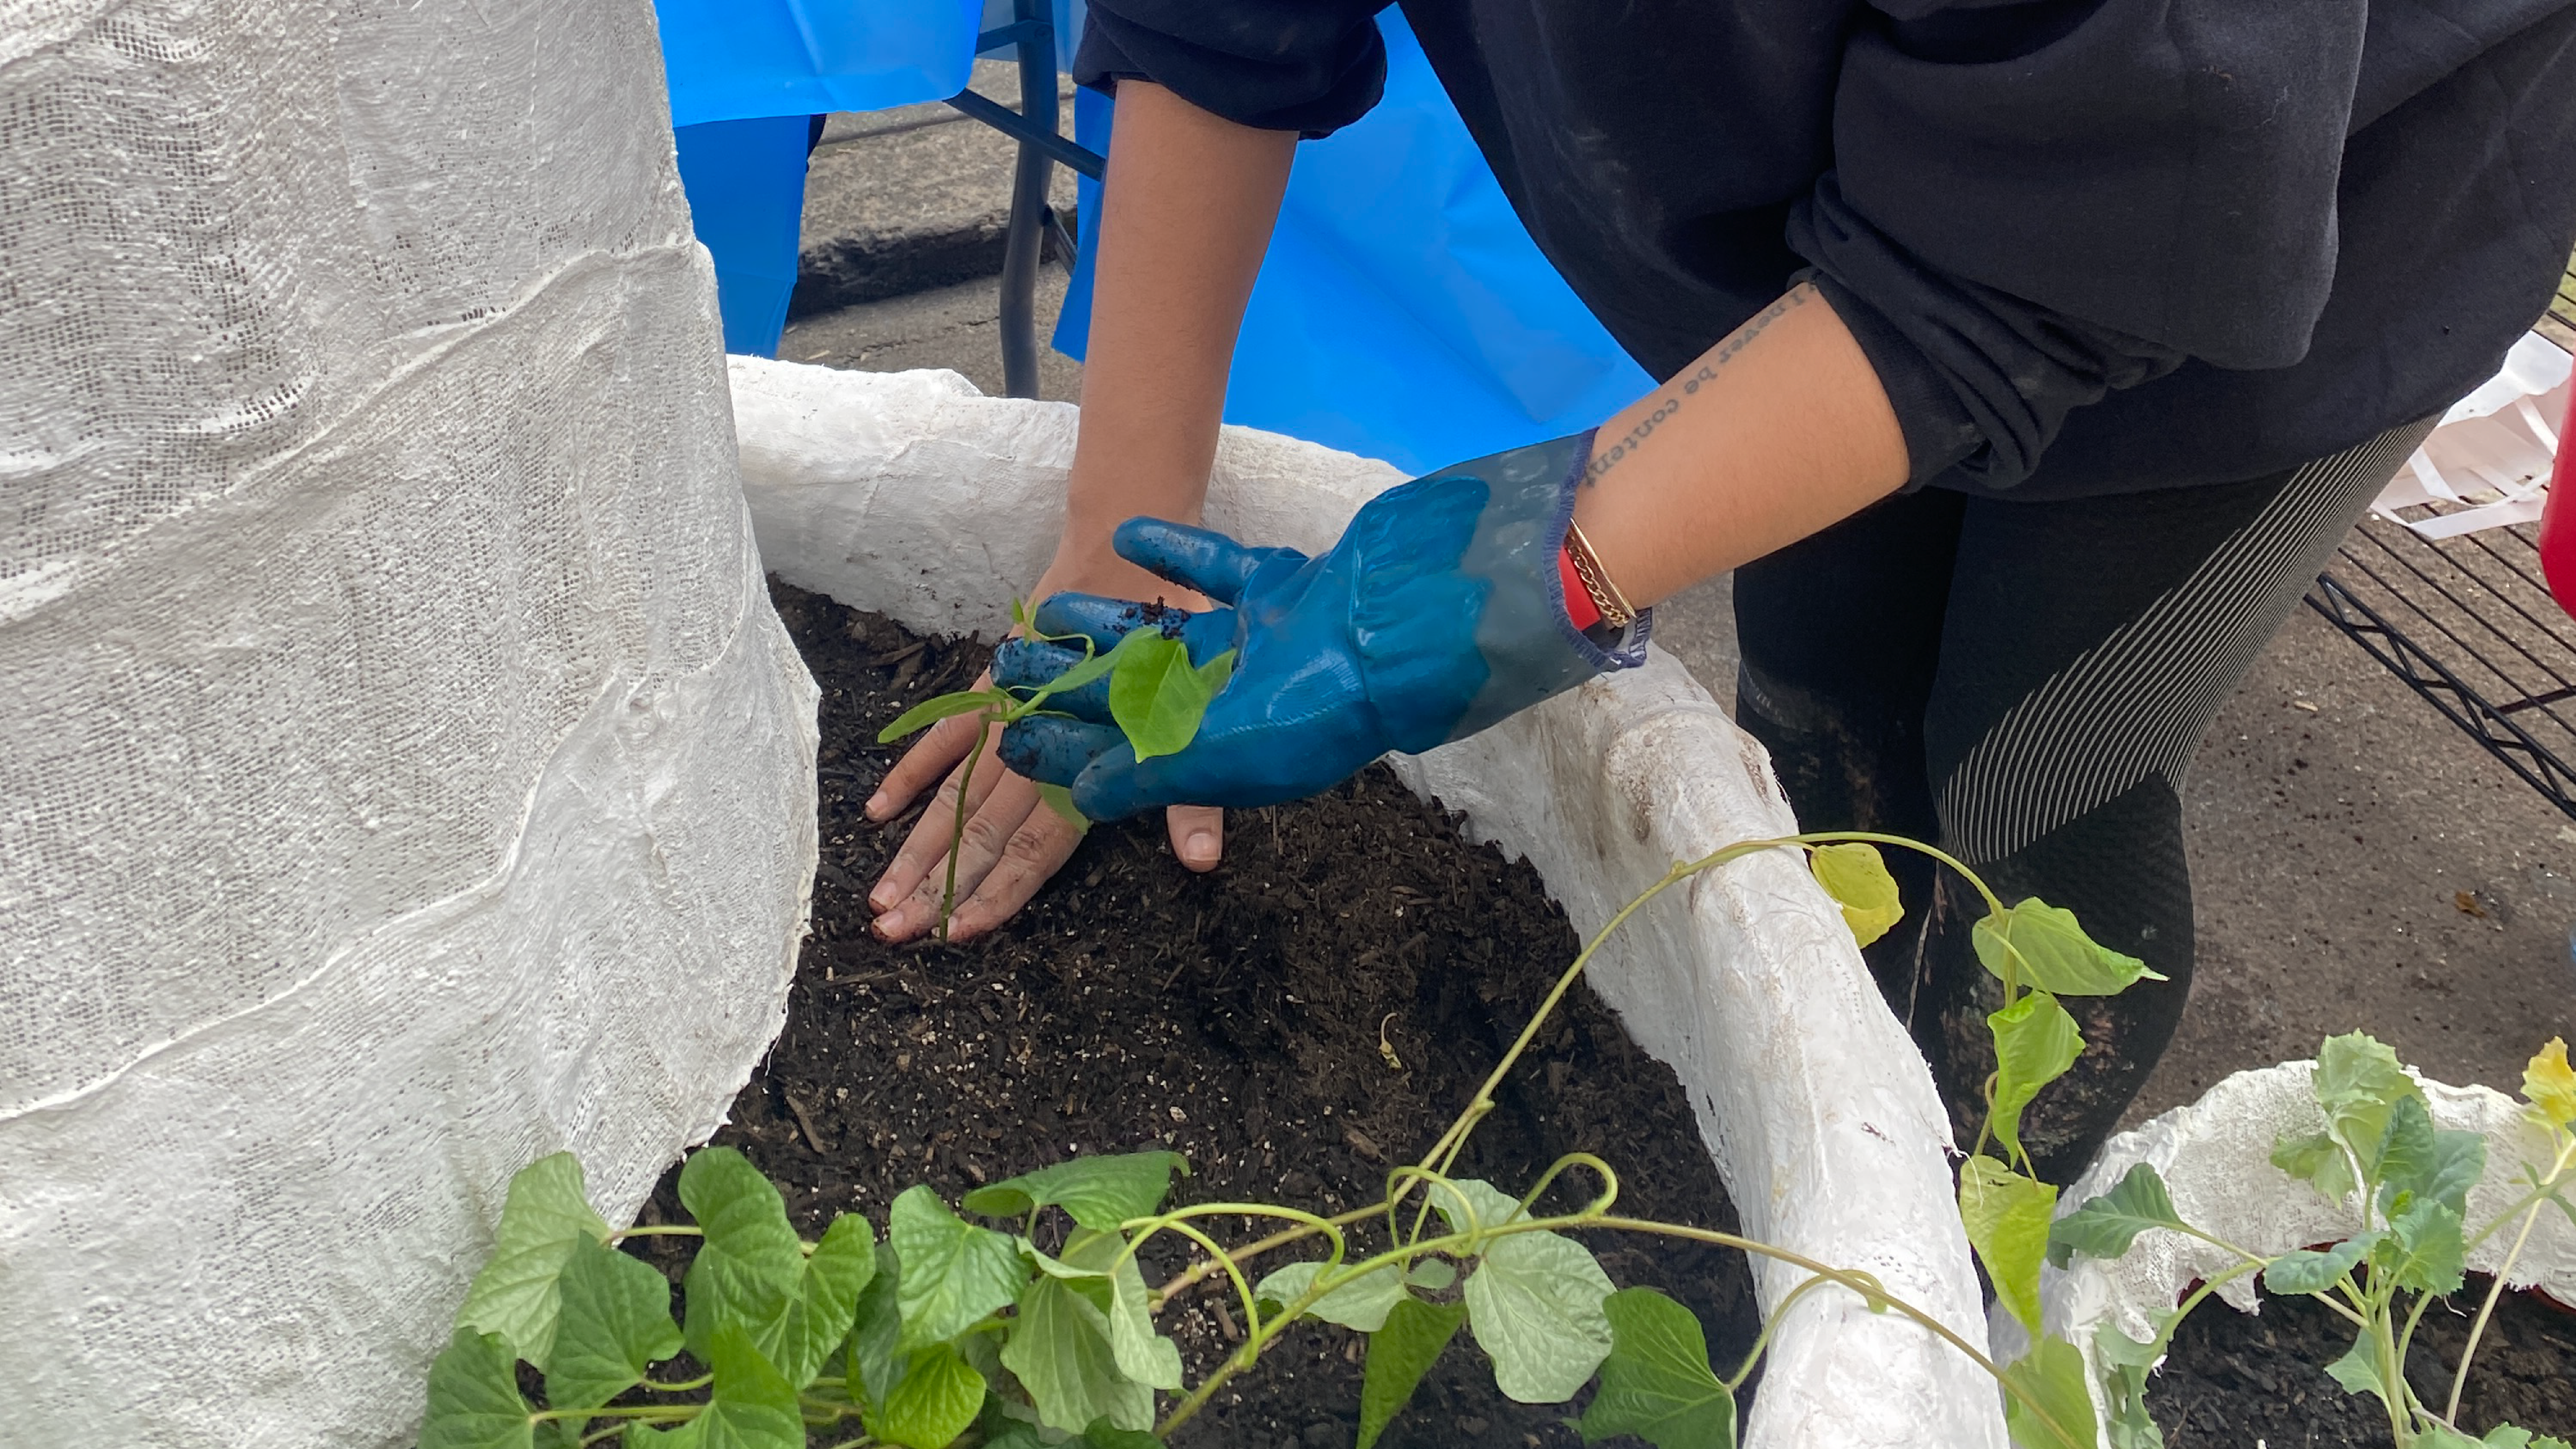 A pair of hands, one gloved one not, is gingerly holding a hull pea seedling. The gloved hand is supporting the leaves while the bare hand is patting the soil around the base of the roots.